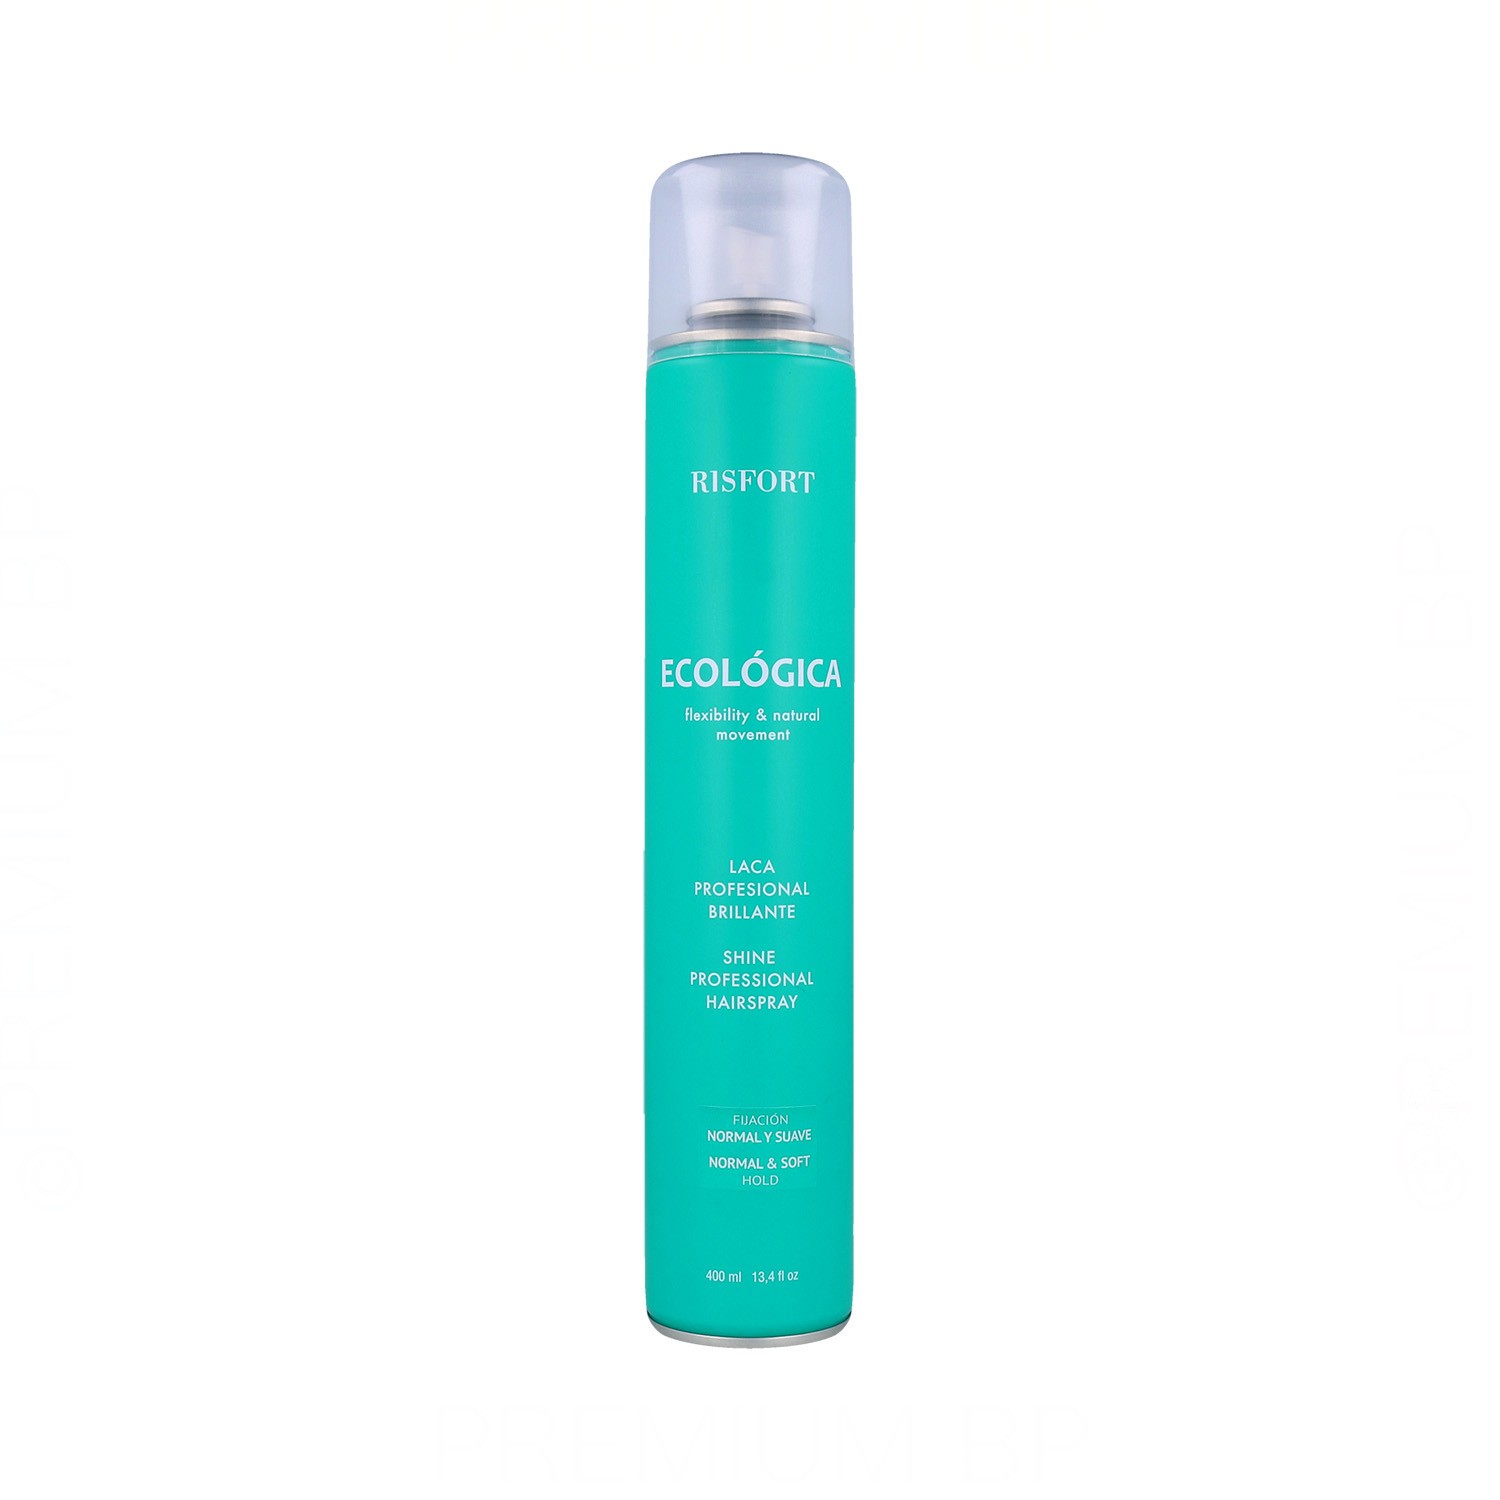 Risfort Diamond Lacquer Ecological Normal 400 ml